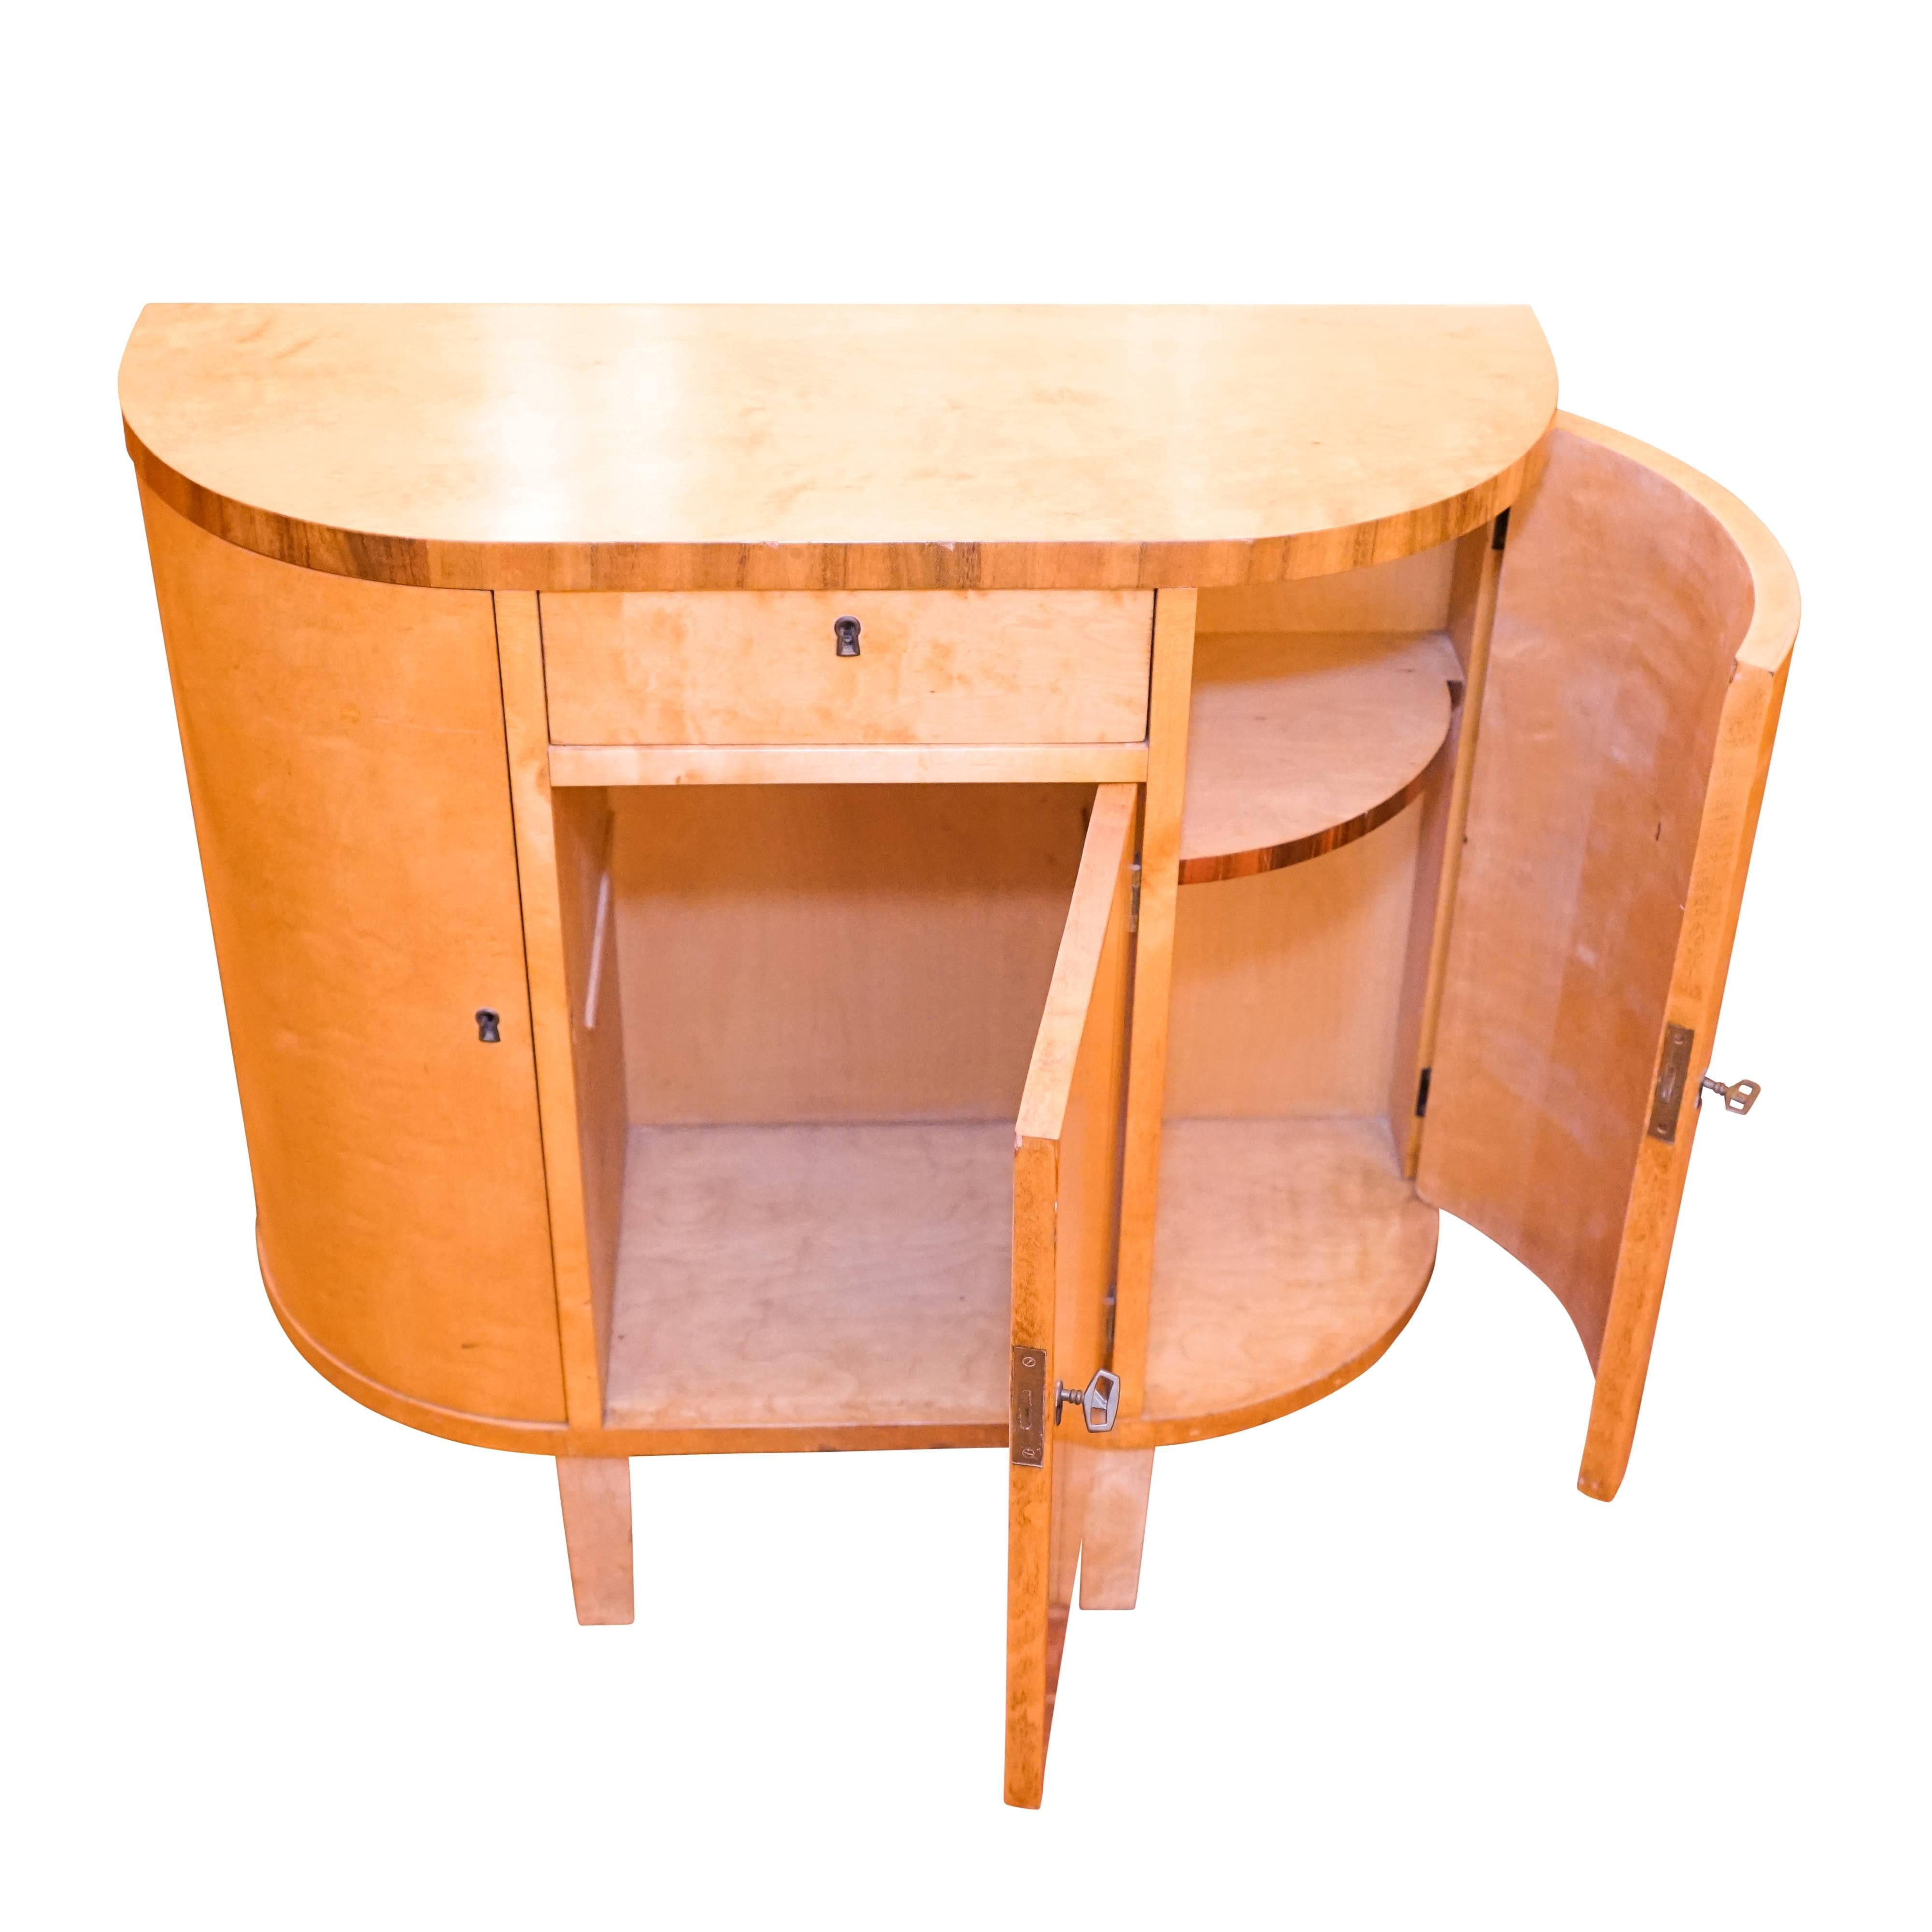 Perfect for a short wall or a small space, this console packs a lot of storage along with sleek Art Deco style! Constructed of solid fir and birch and veneered with choice nordic birch with rosewood banding, all compartments as well as the center